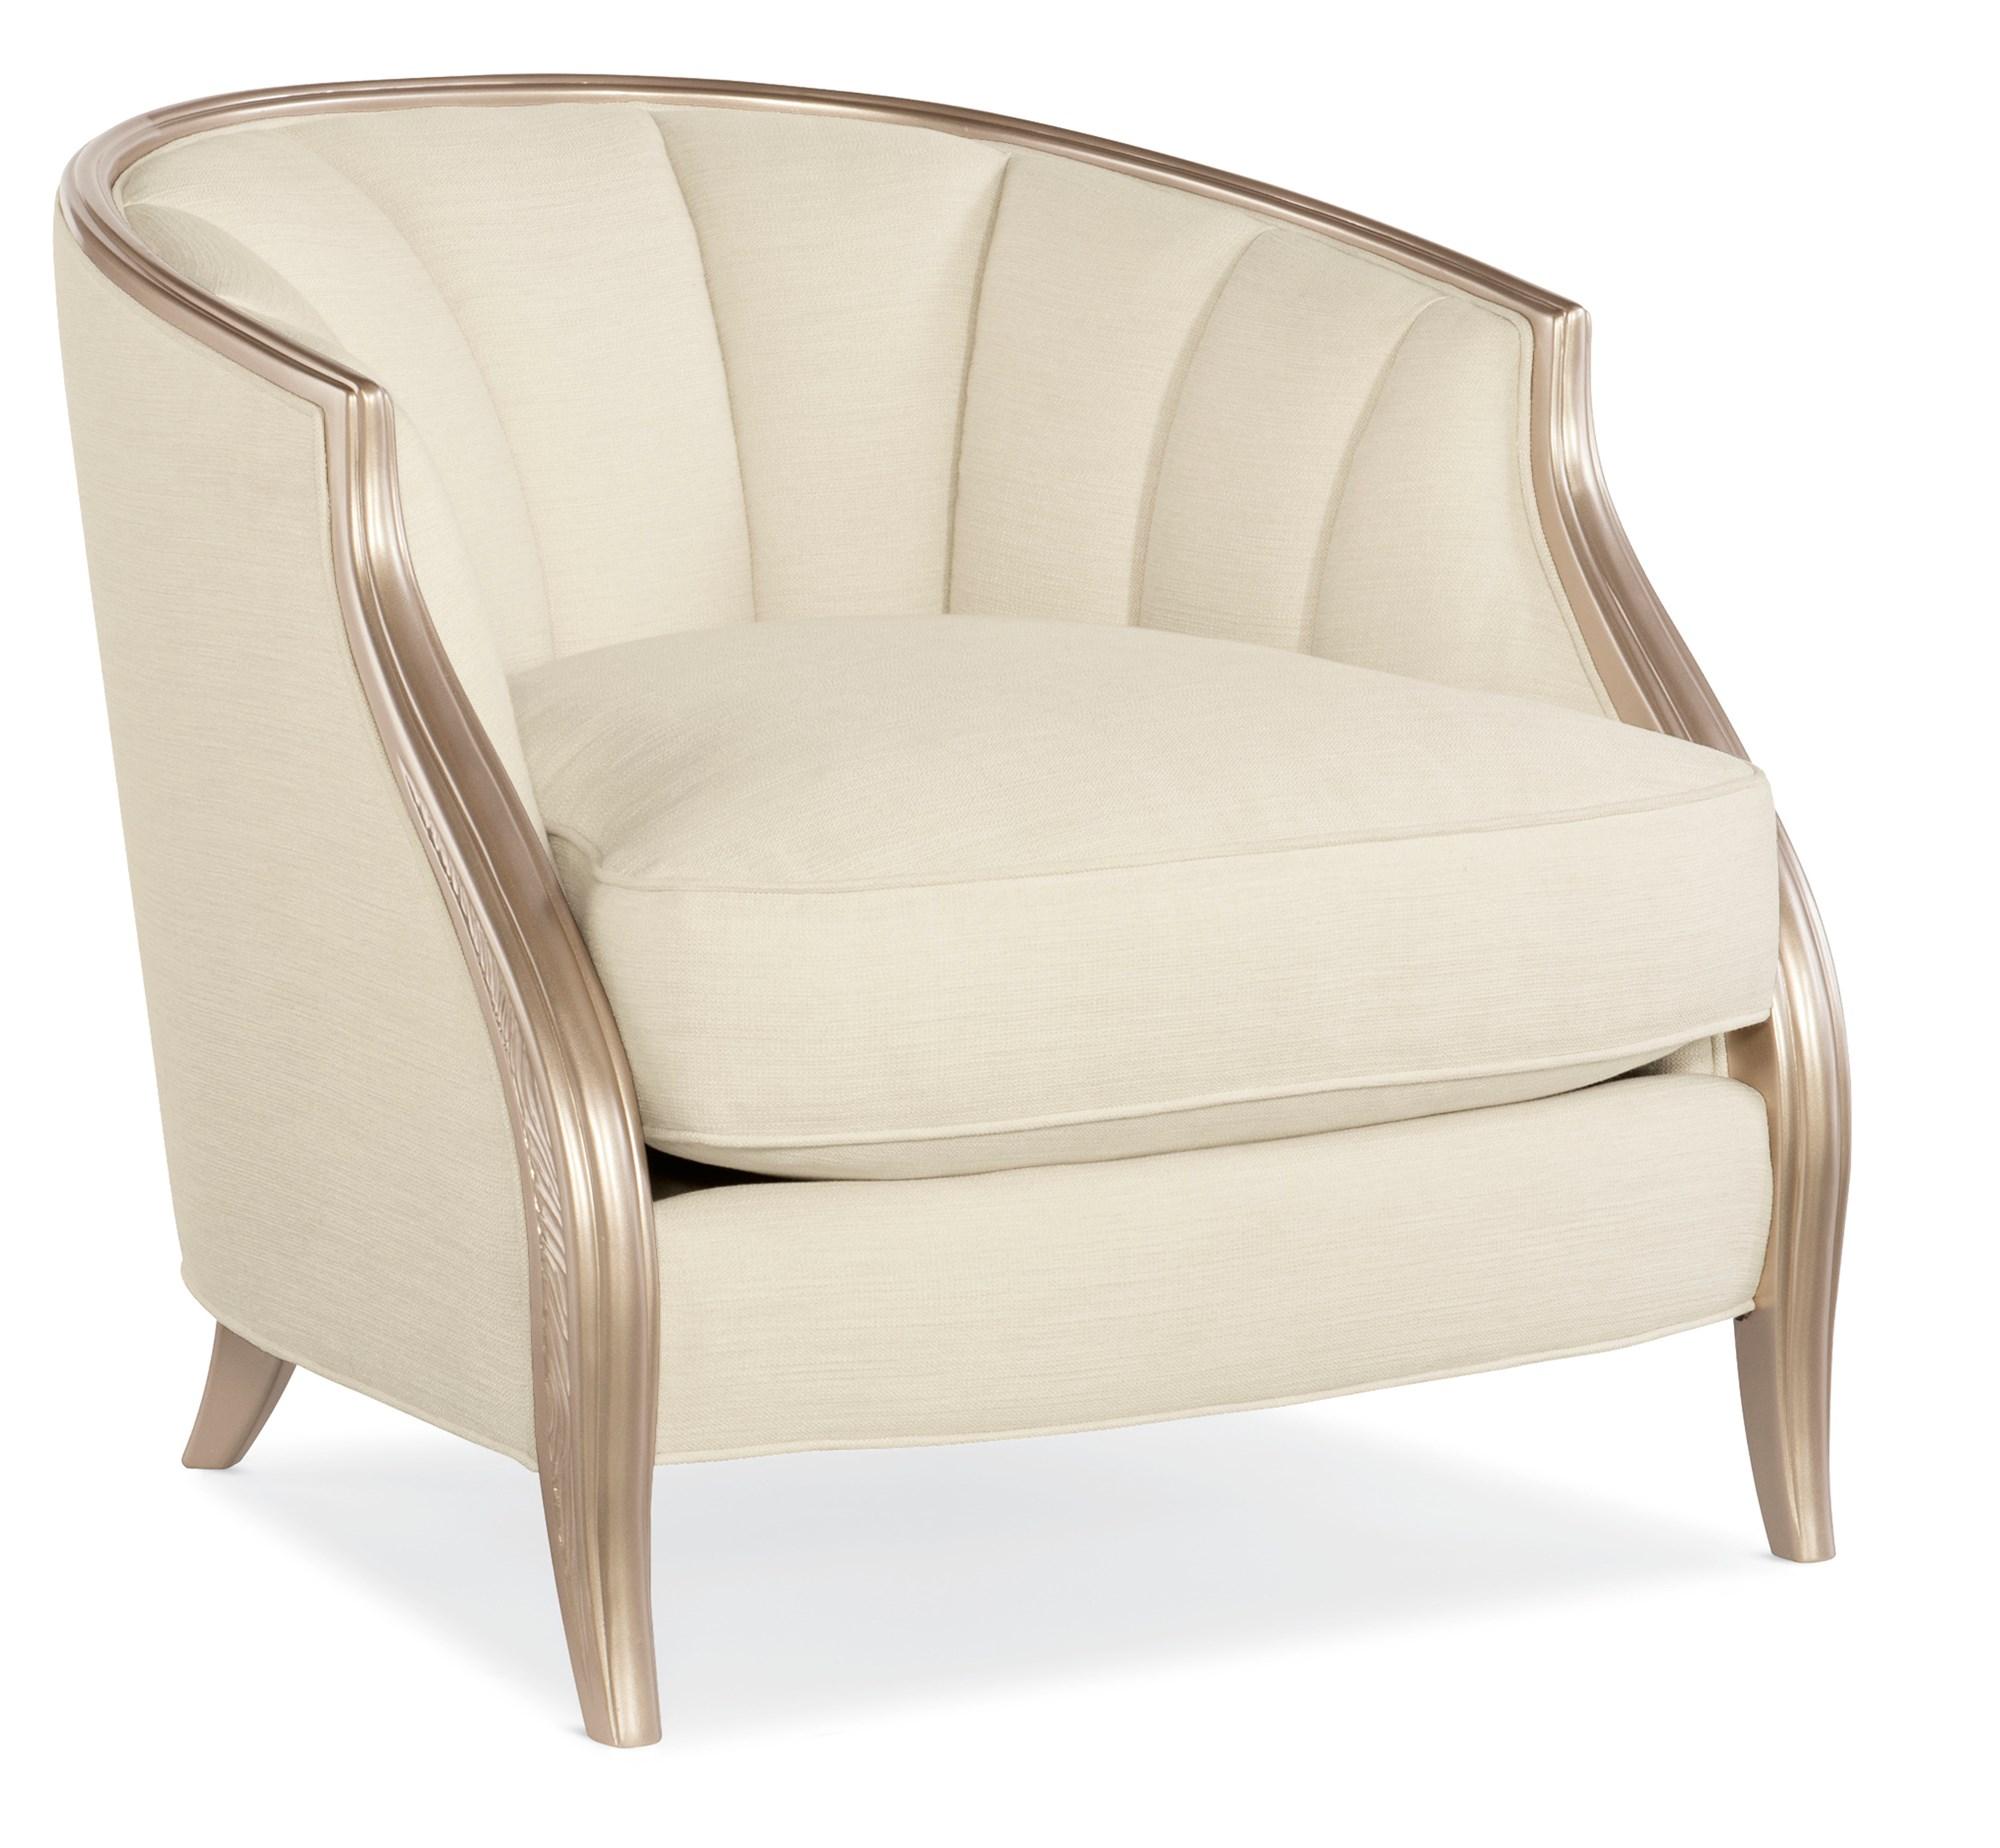 Traditional Armchair ADELA CHAIR C010-016-035-A in Cream, Taupe Fabric